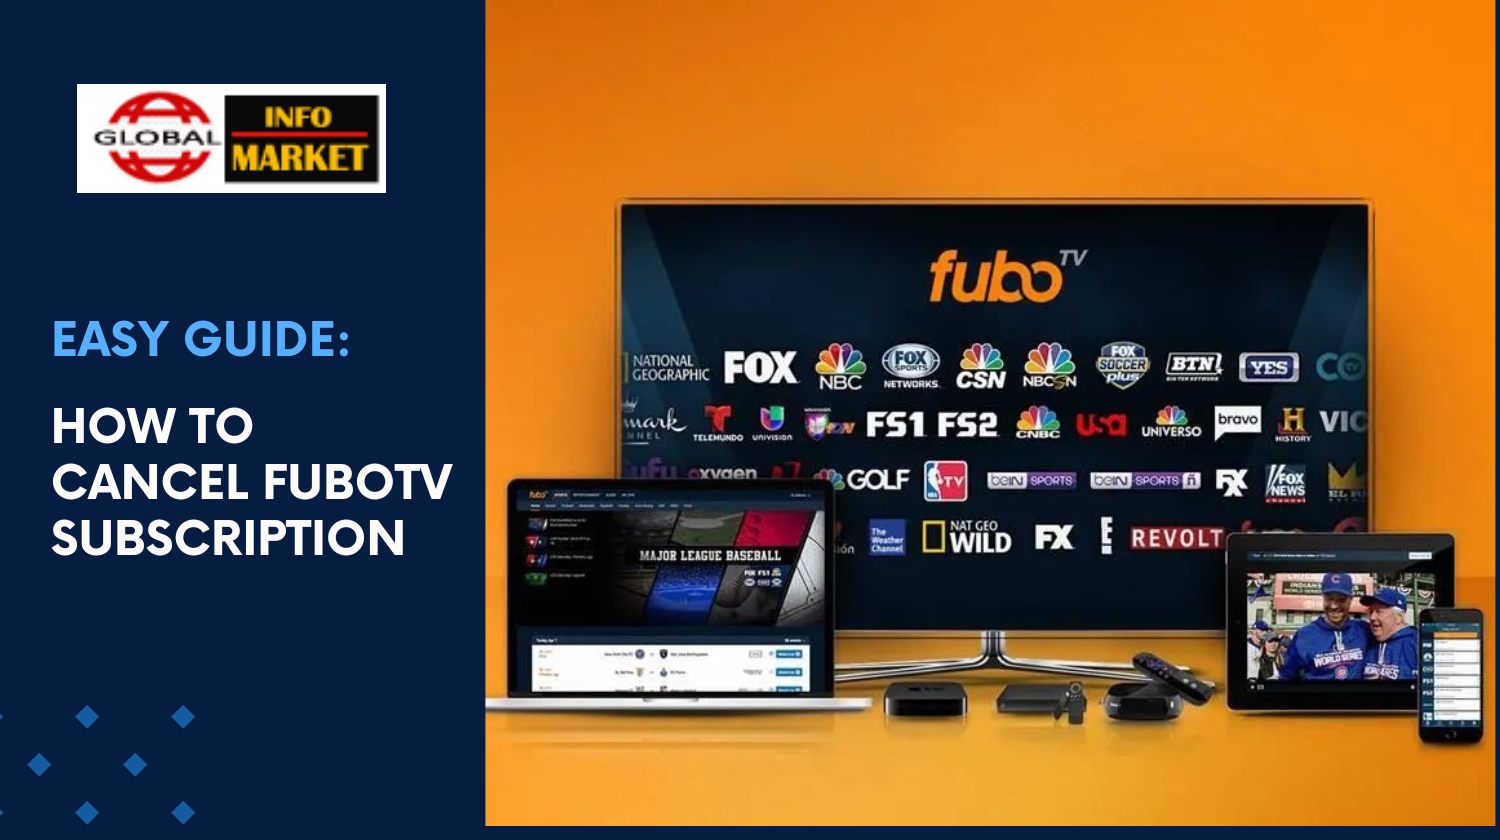 Easy Guide: How To Cancel FuboTv Subscription on FuboTv and Other Devices